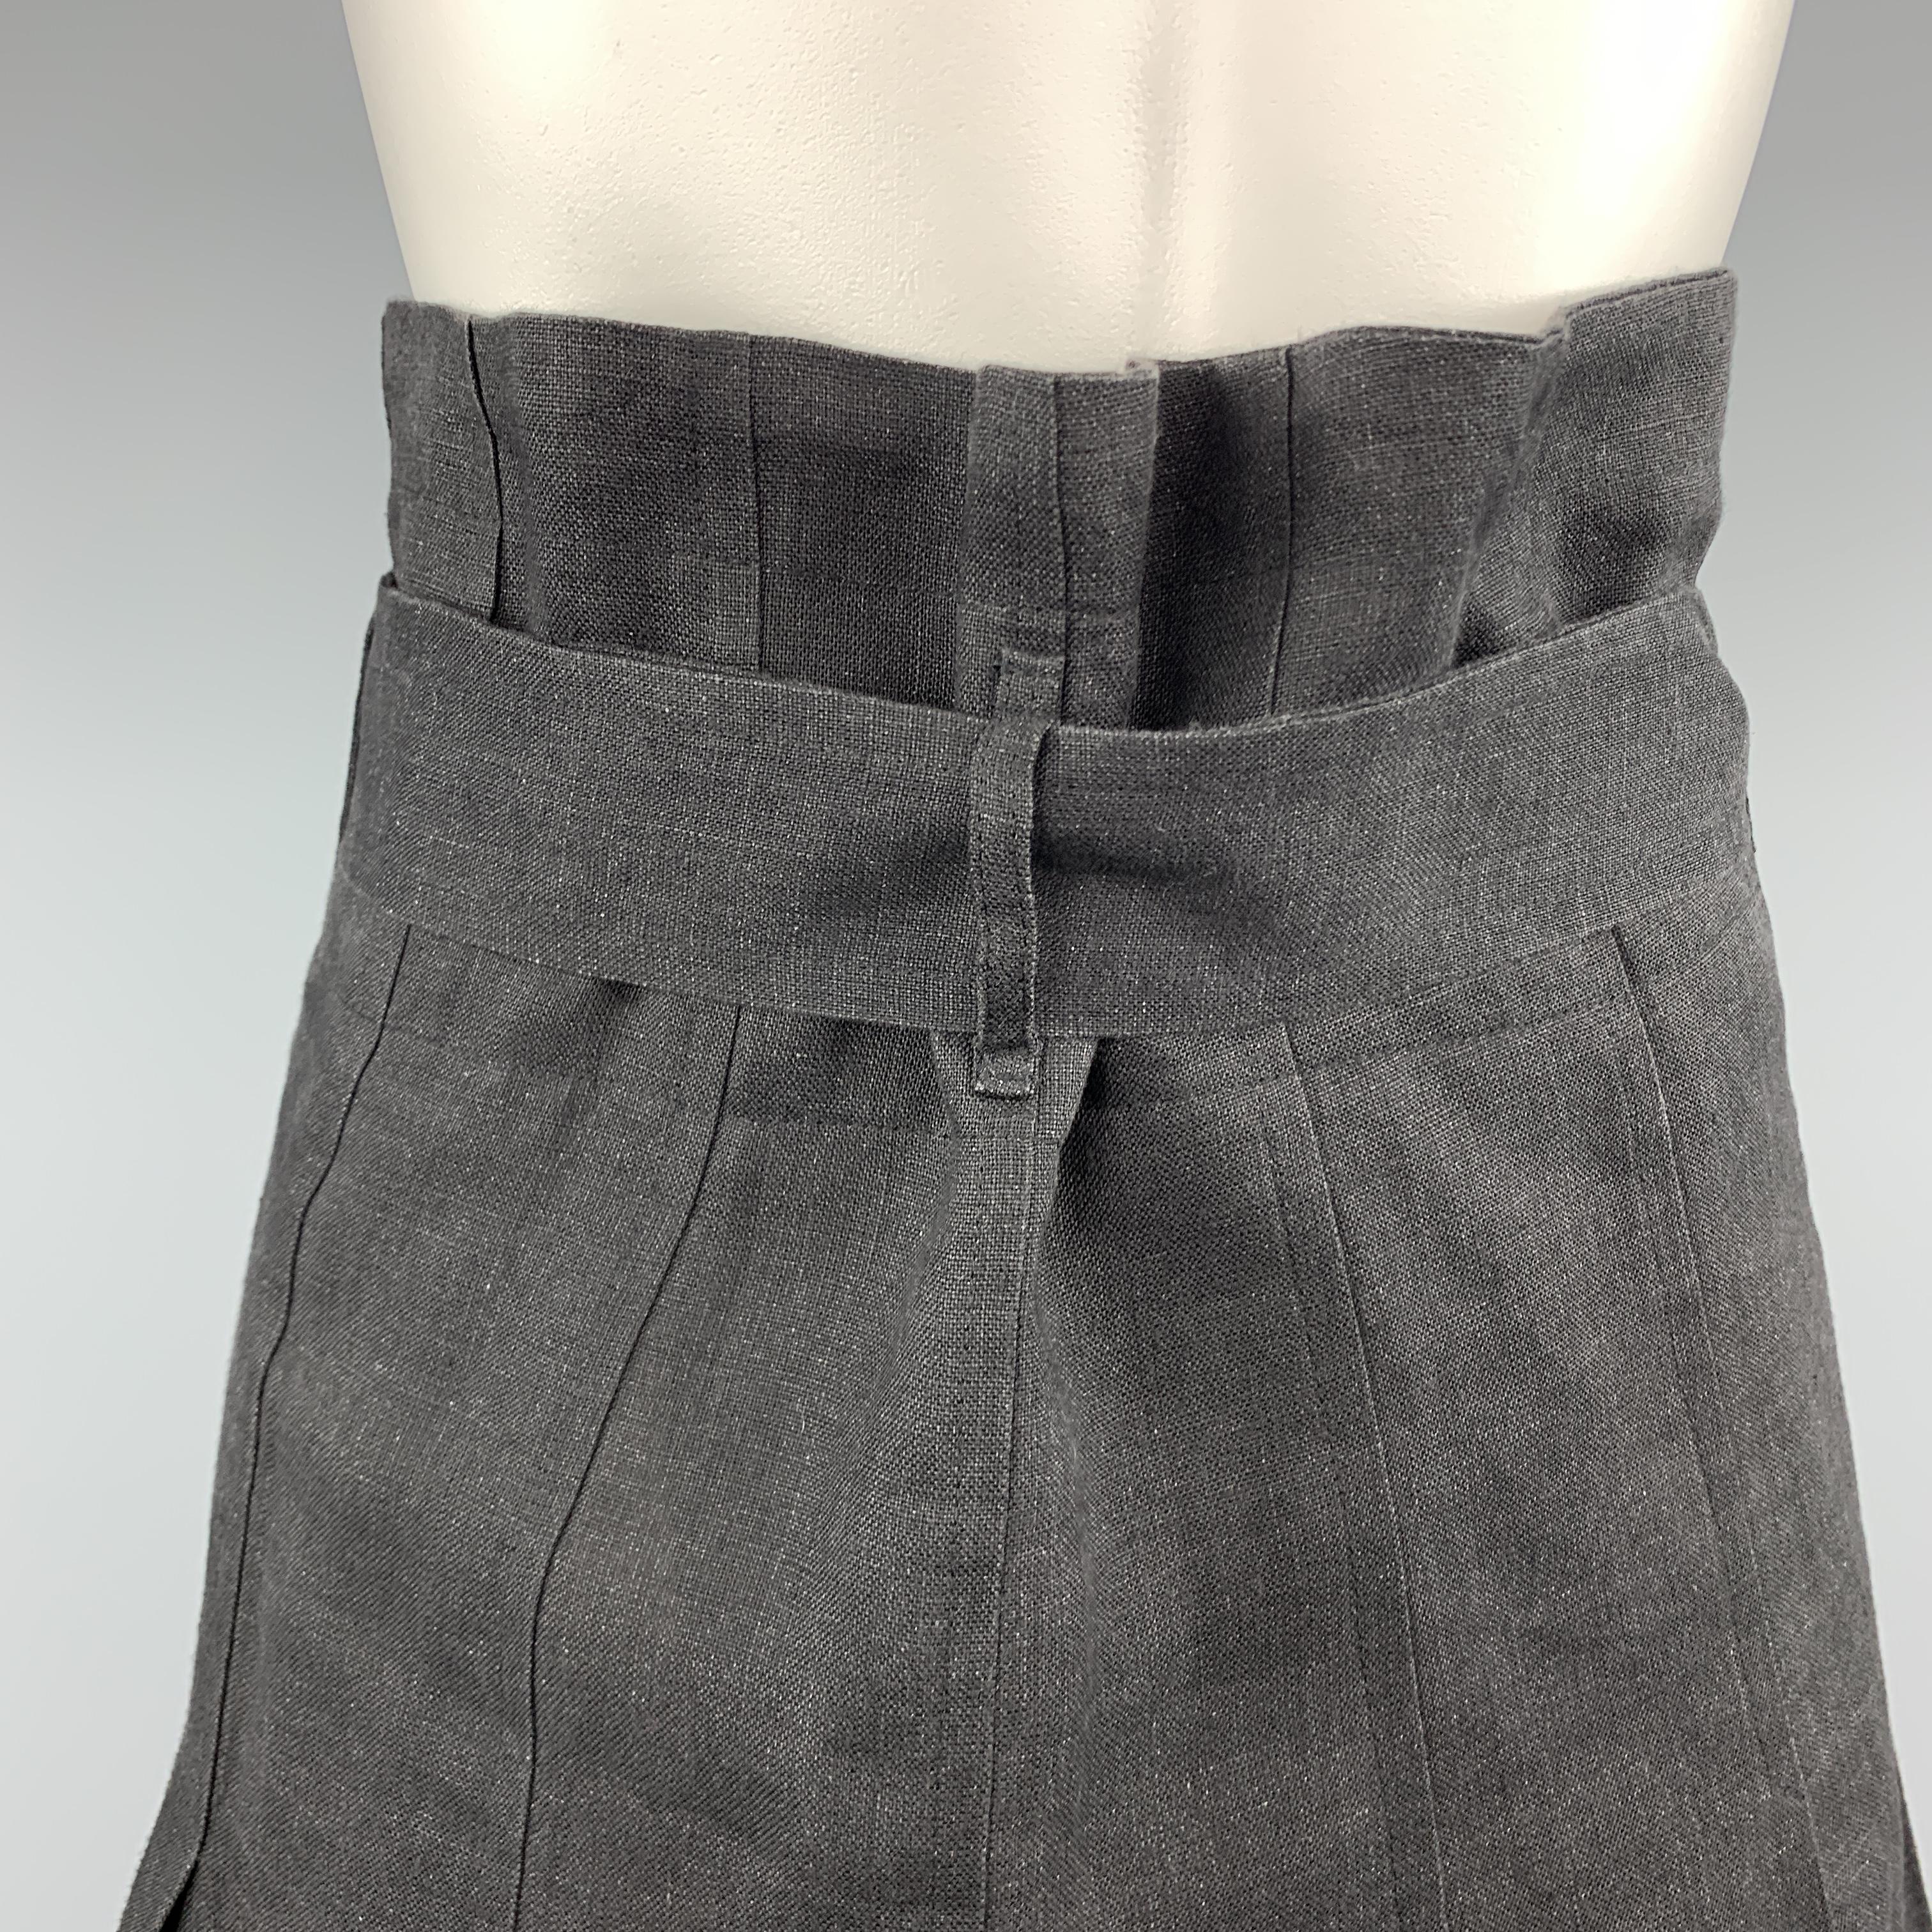 Vintage COMME des GARCONS skirt comes in black linen with box pleats and a partially internal waistband that gathers the top. Made in France.
 
Excellent Pre-Owned Condition.
Marked: S
 
Measurements:
 
Waist: 30 in.
Hip: 37 in.
Length: 22 in.